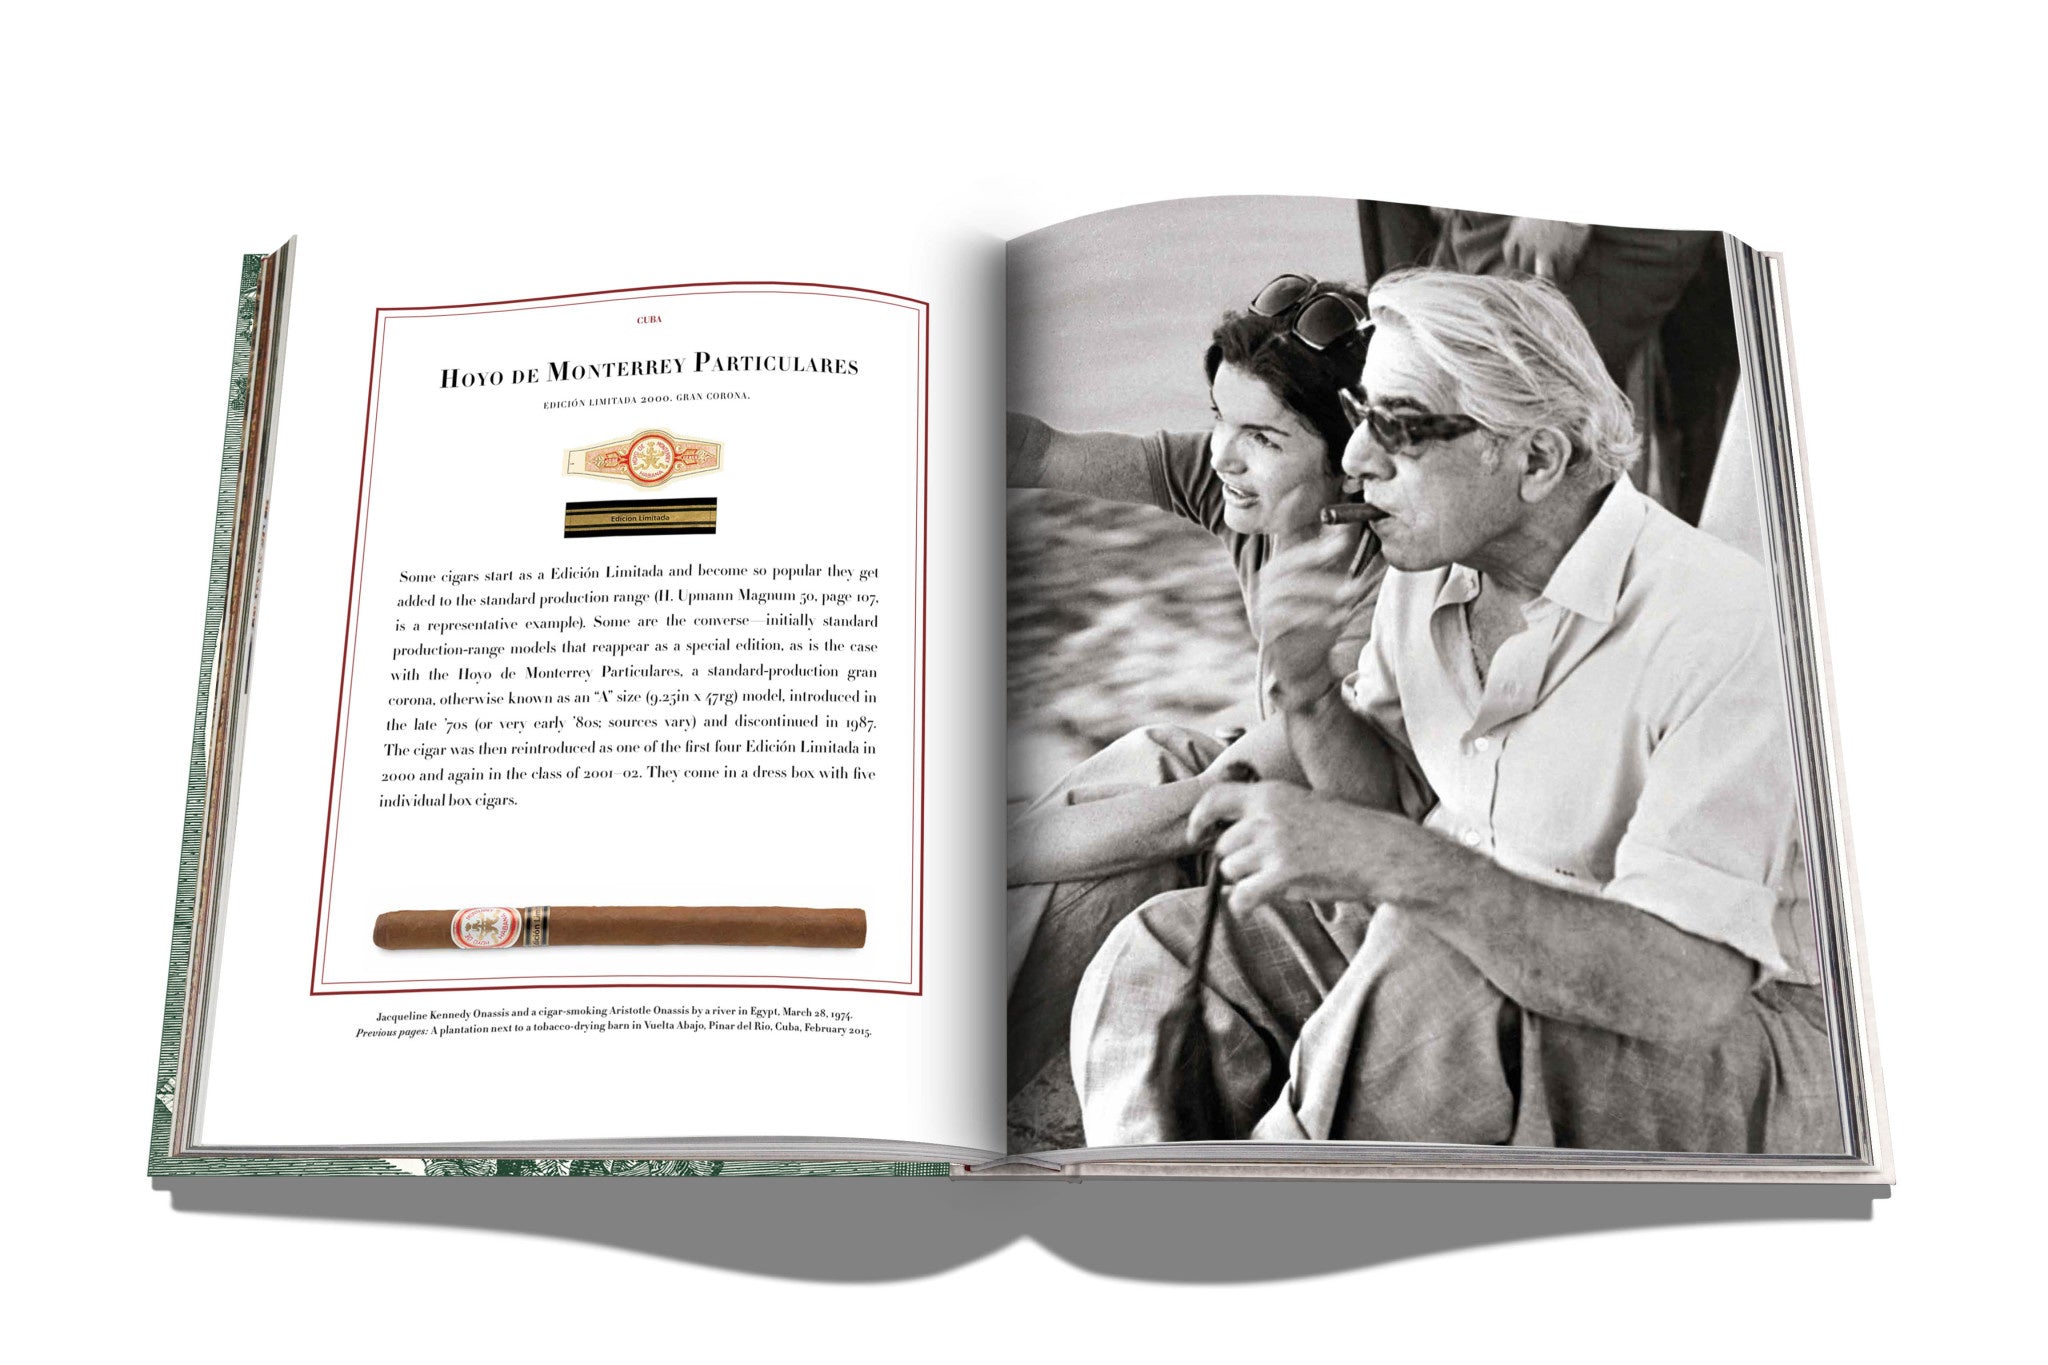 Maison Lipari Impossible Collection of Cigars  ASSOULINE.